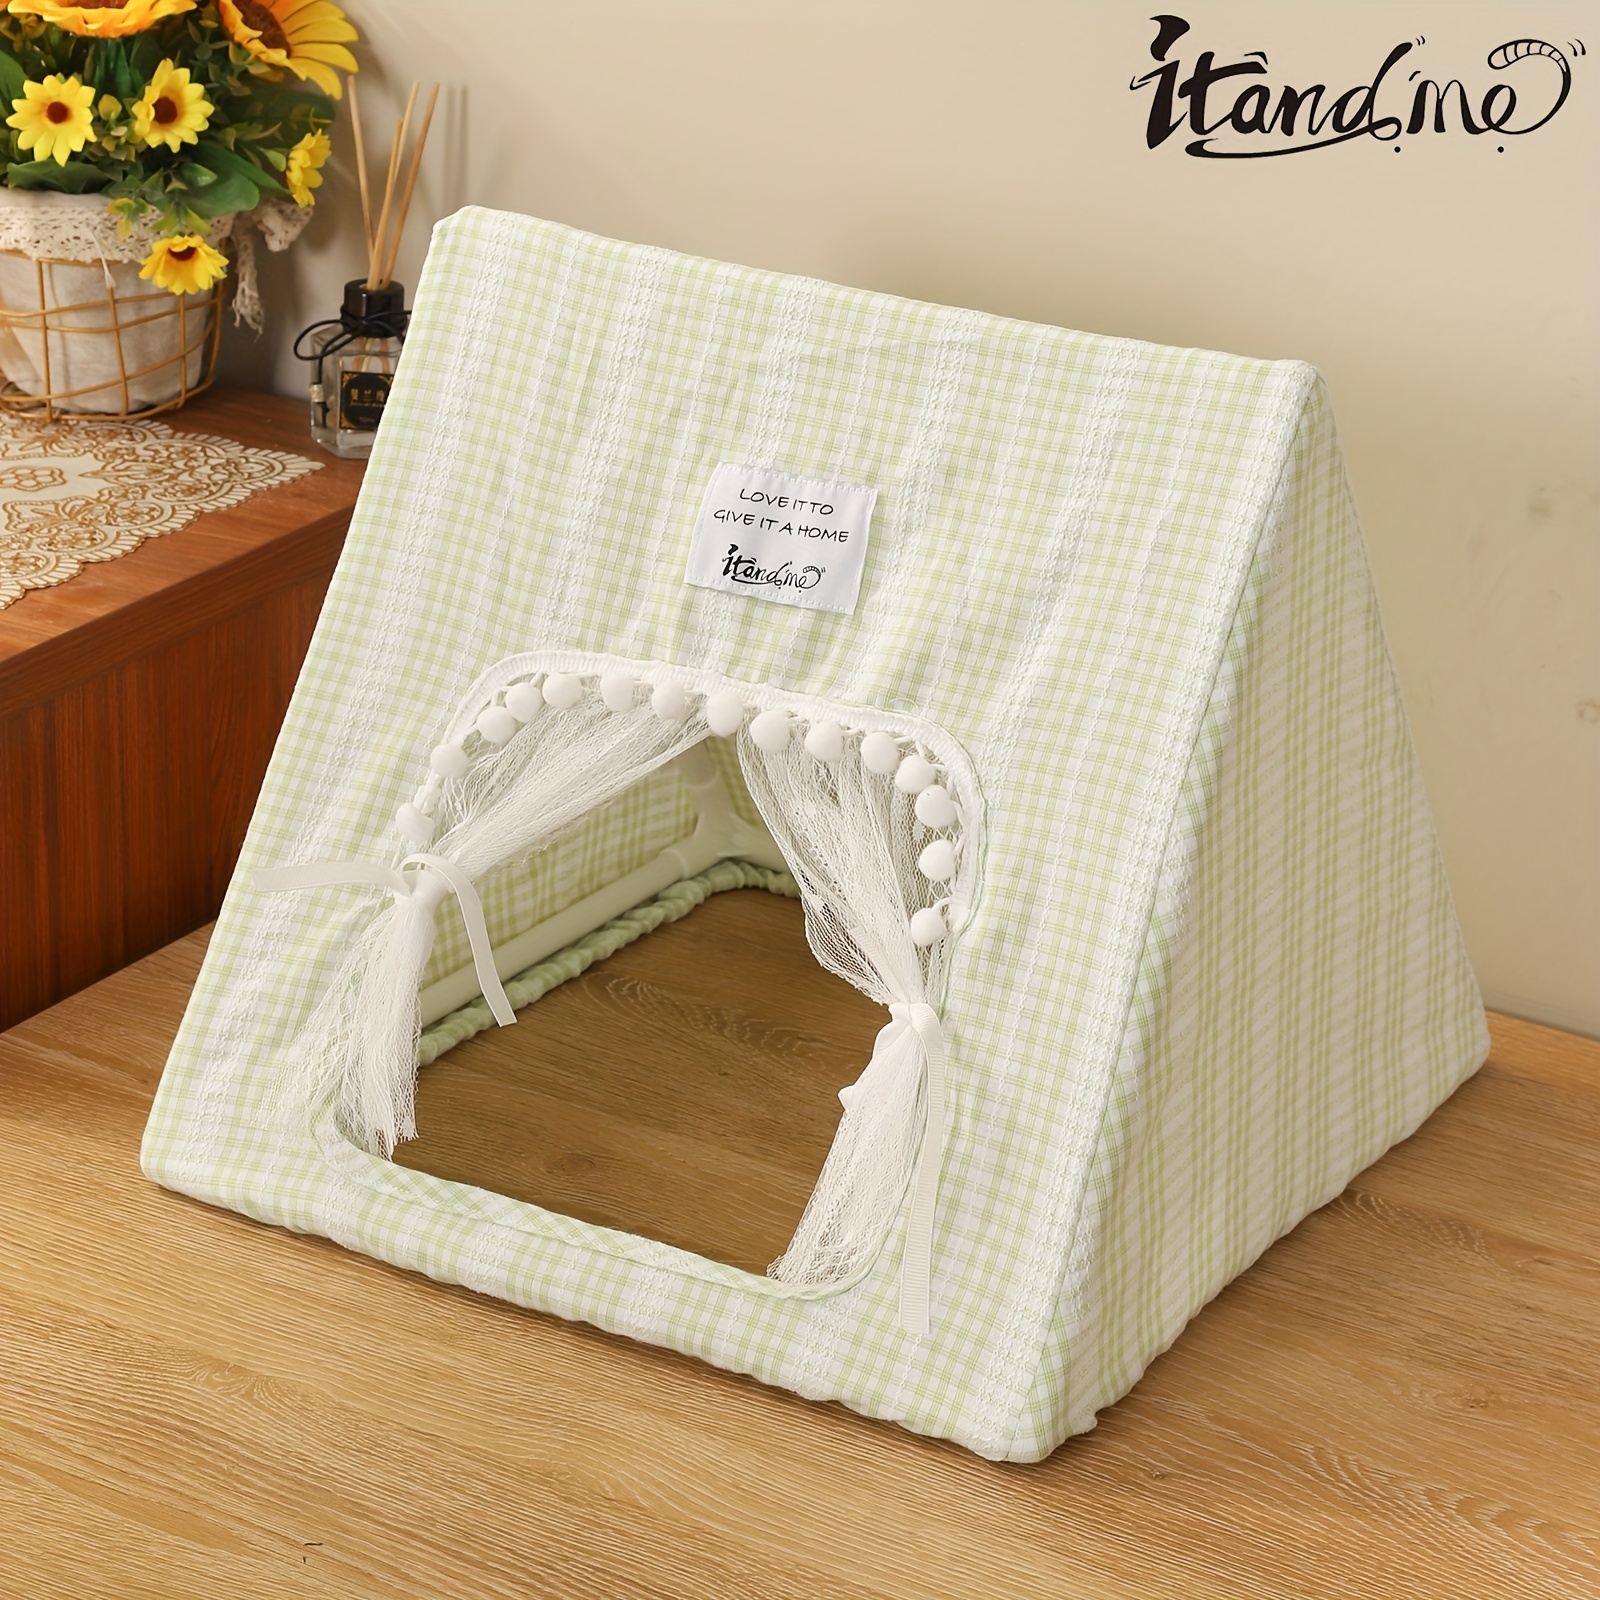 

Itandme Cozy Small Pet Tent - Polyester Rabbit & Guinea Pig Hideaway House For Sleeping And Play Rabbit Hutch Indoor Indoor Rabbit Hutch